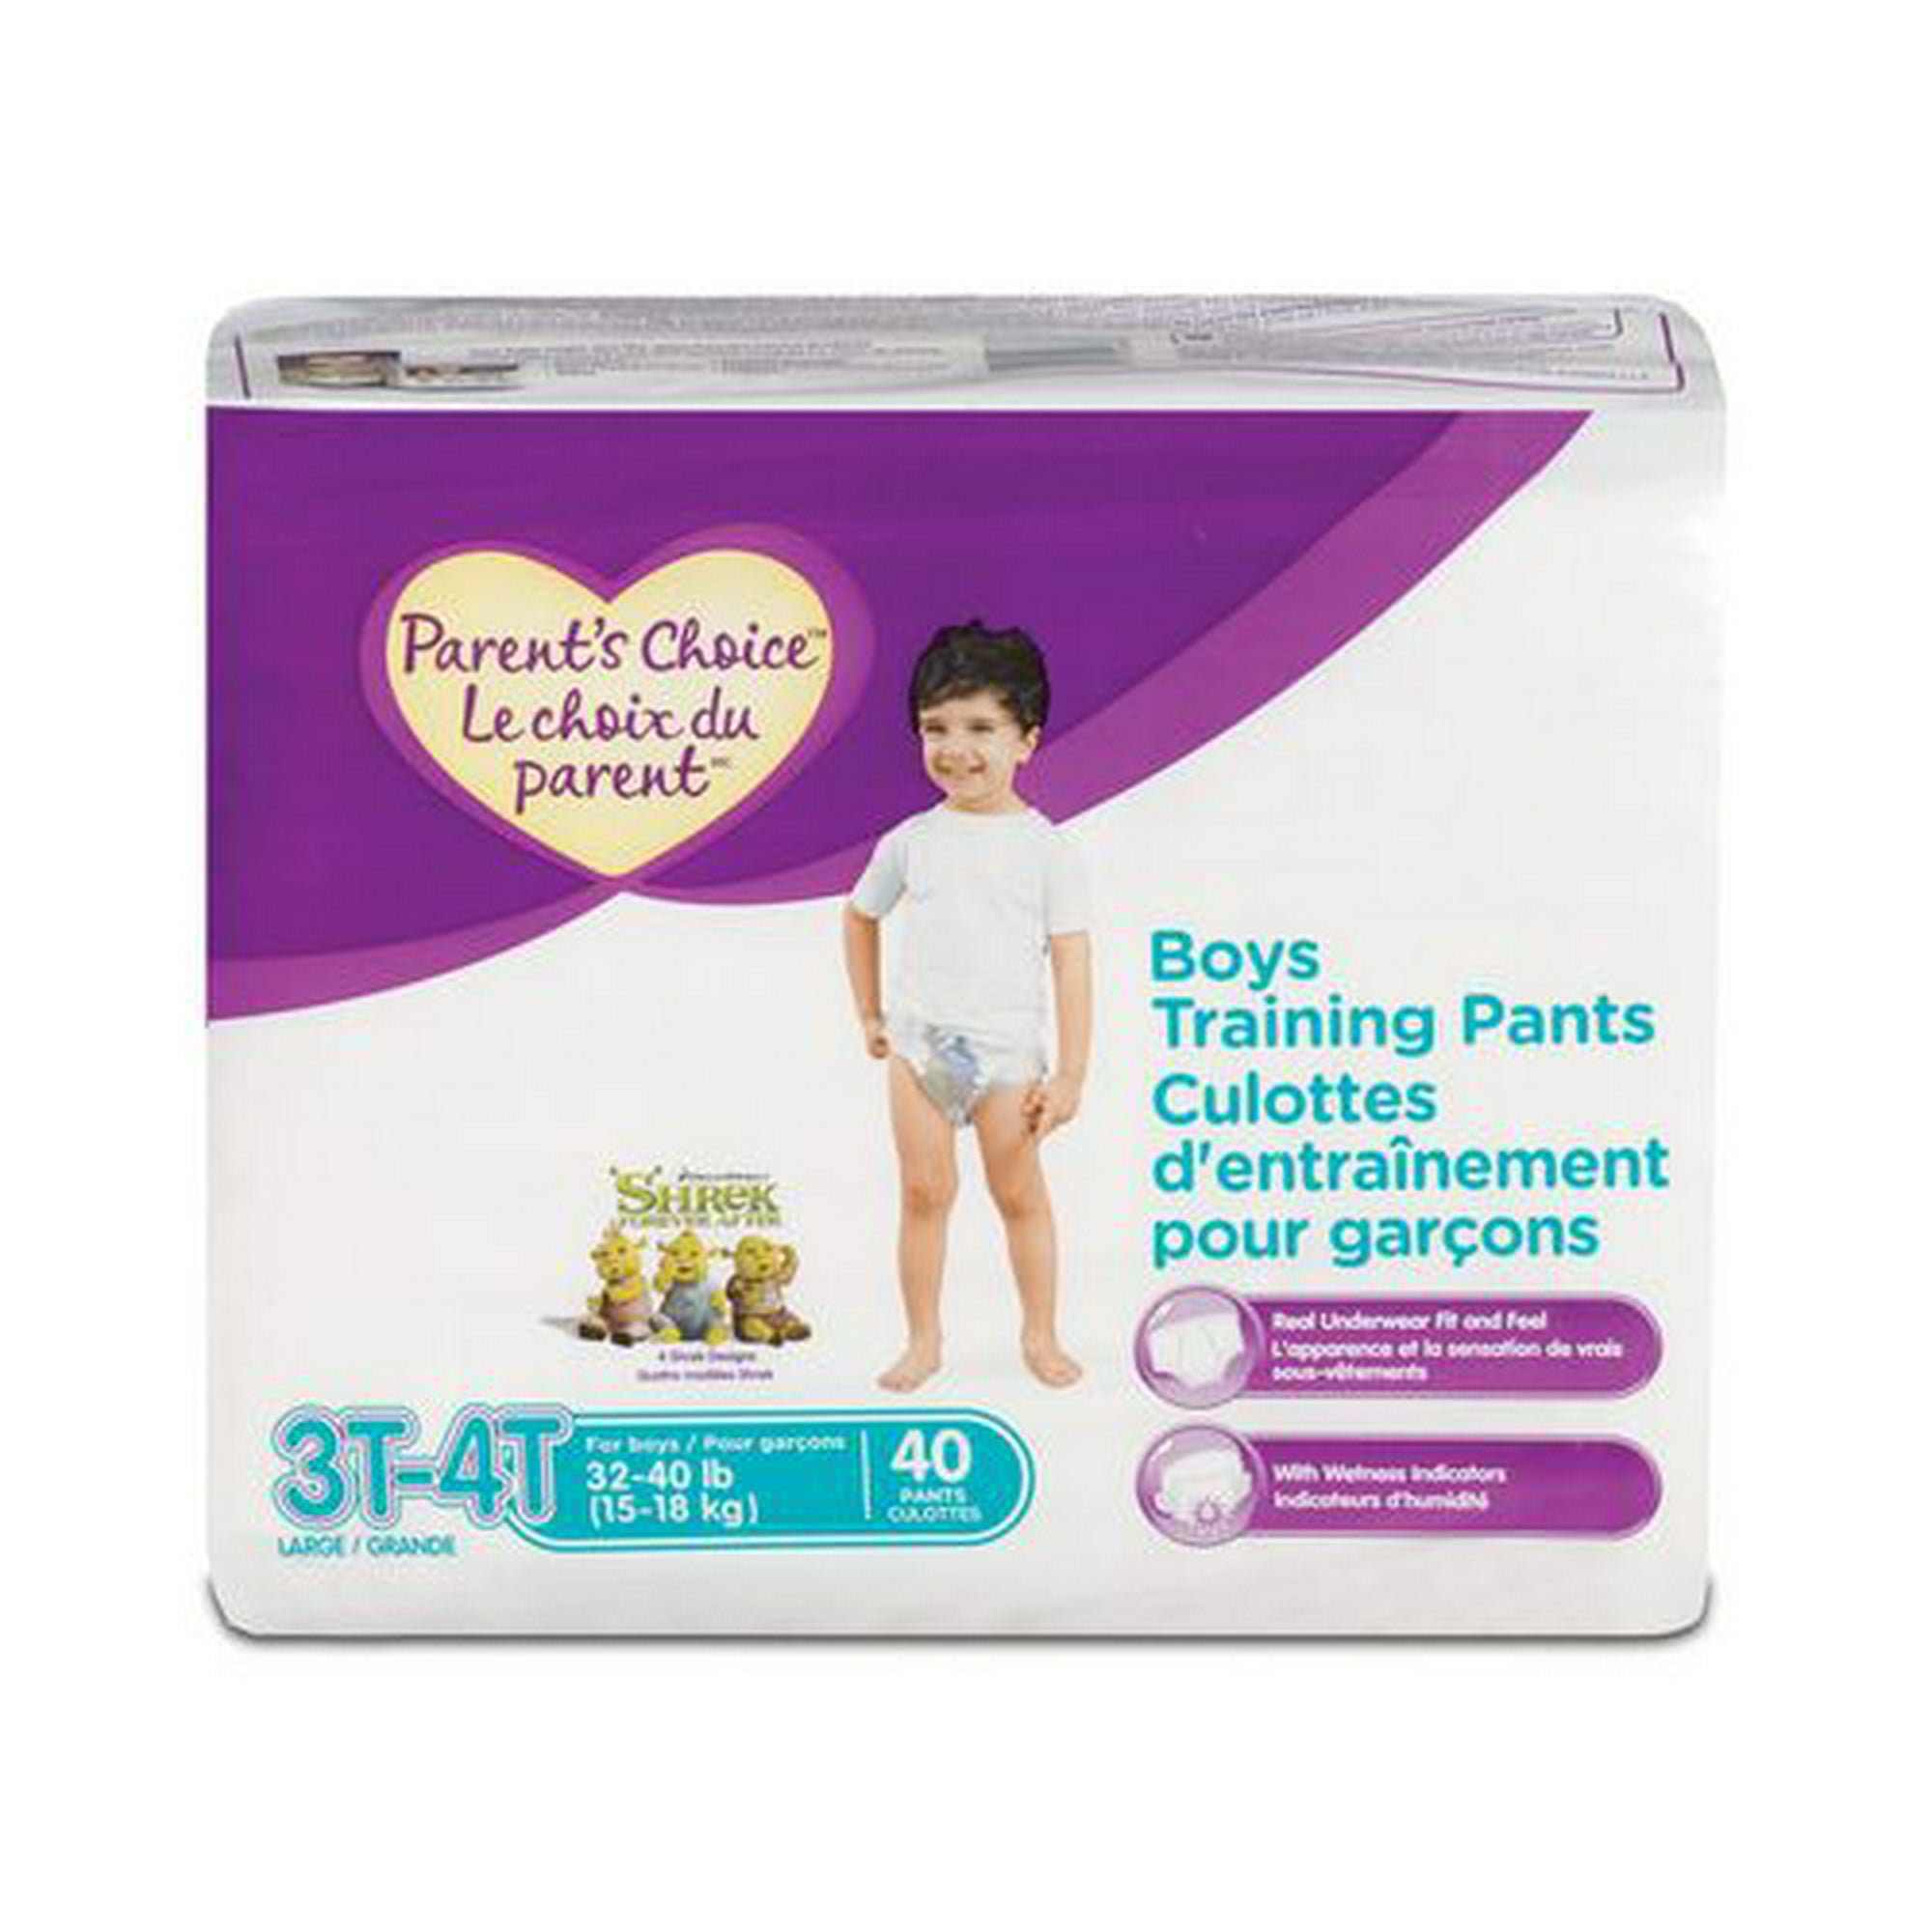 Pampers Easy Ups Boys Training Underwear, Super Pack, Sizes 2-6, 74-46 Count